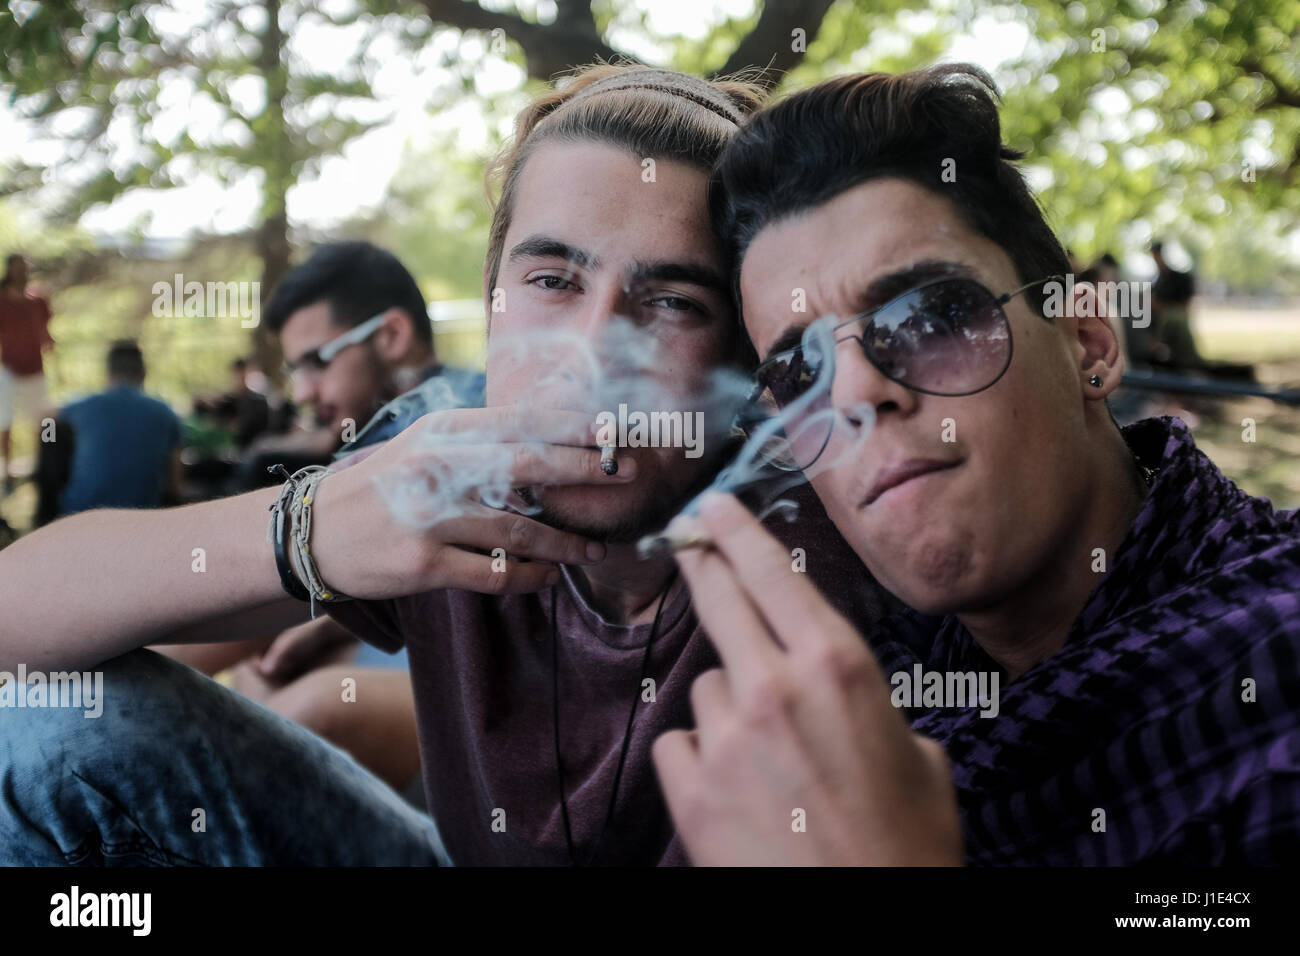 Jerusalem, Israel. 20th April, 2017. Activists for legalization of recreational marijuana symbolically meet at 4:20 at the Wohl Rose Park opposite the Knesset Parliament Building for the Big Bong Night, a twelve hour celebration on International Cannabis Day. The April 20 (4/20) celebration began in the 1970s as the time of day after school, 4:20 pm, for high school students in San Rafael, California to meet to smoke marijuana. Credit: Nir Alon/Alamy Live News Stock Photo